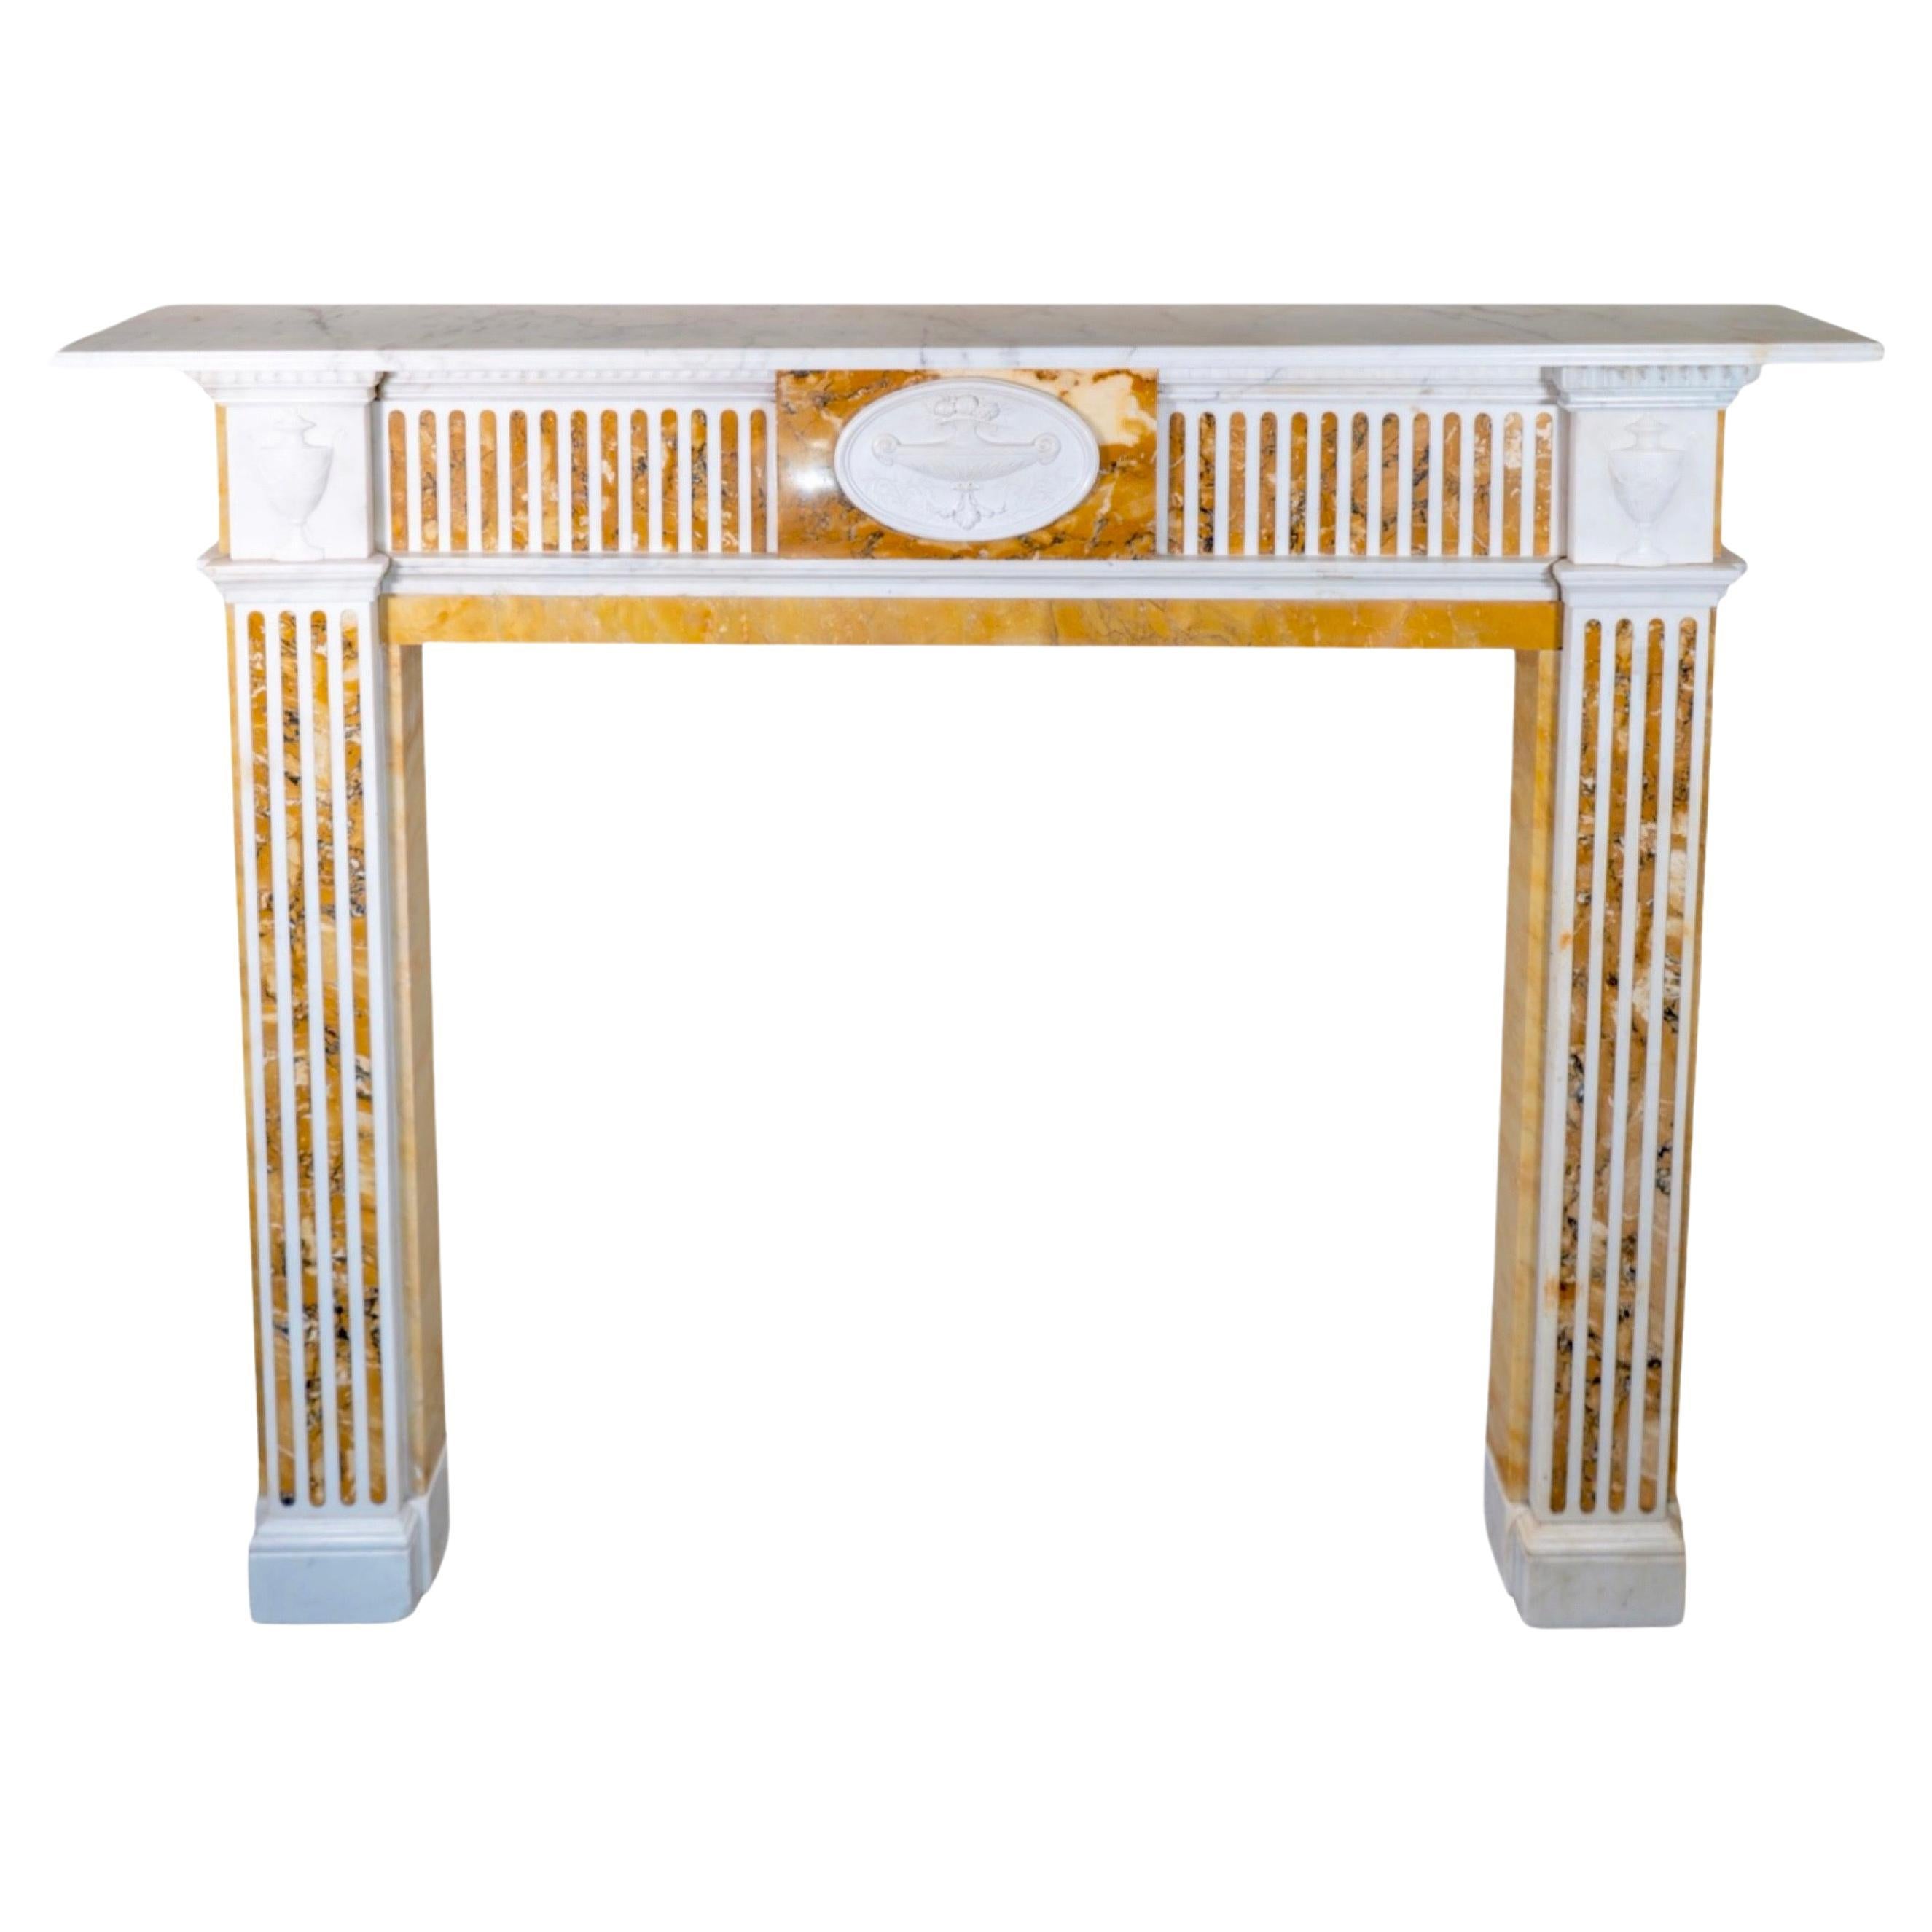 English White Veined Carrara and Sienna Brocatelle Marble Mantel For Sale